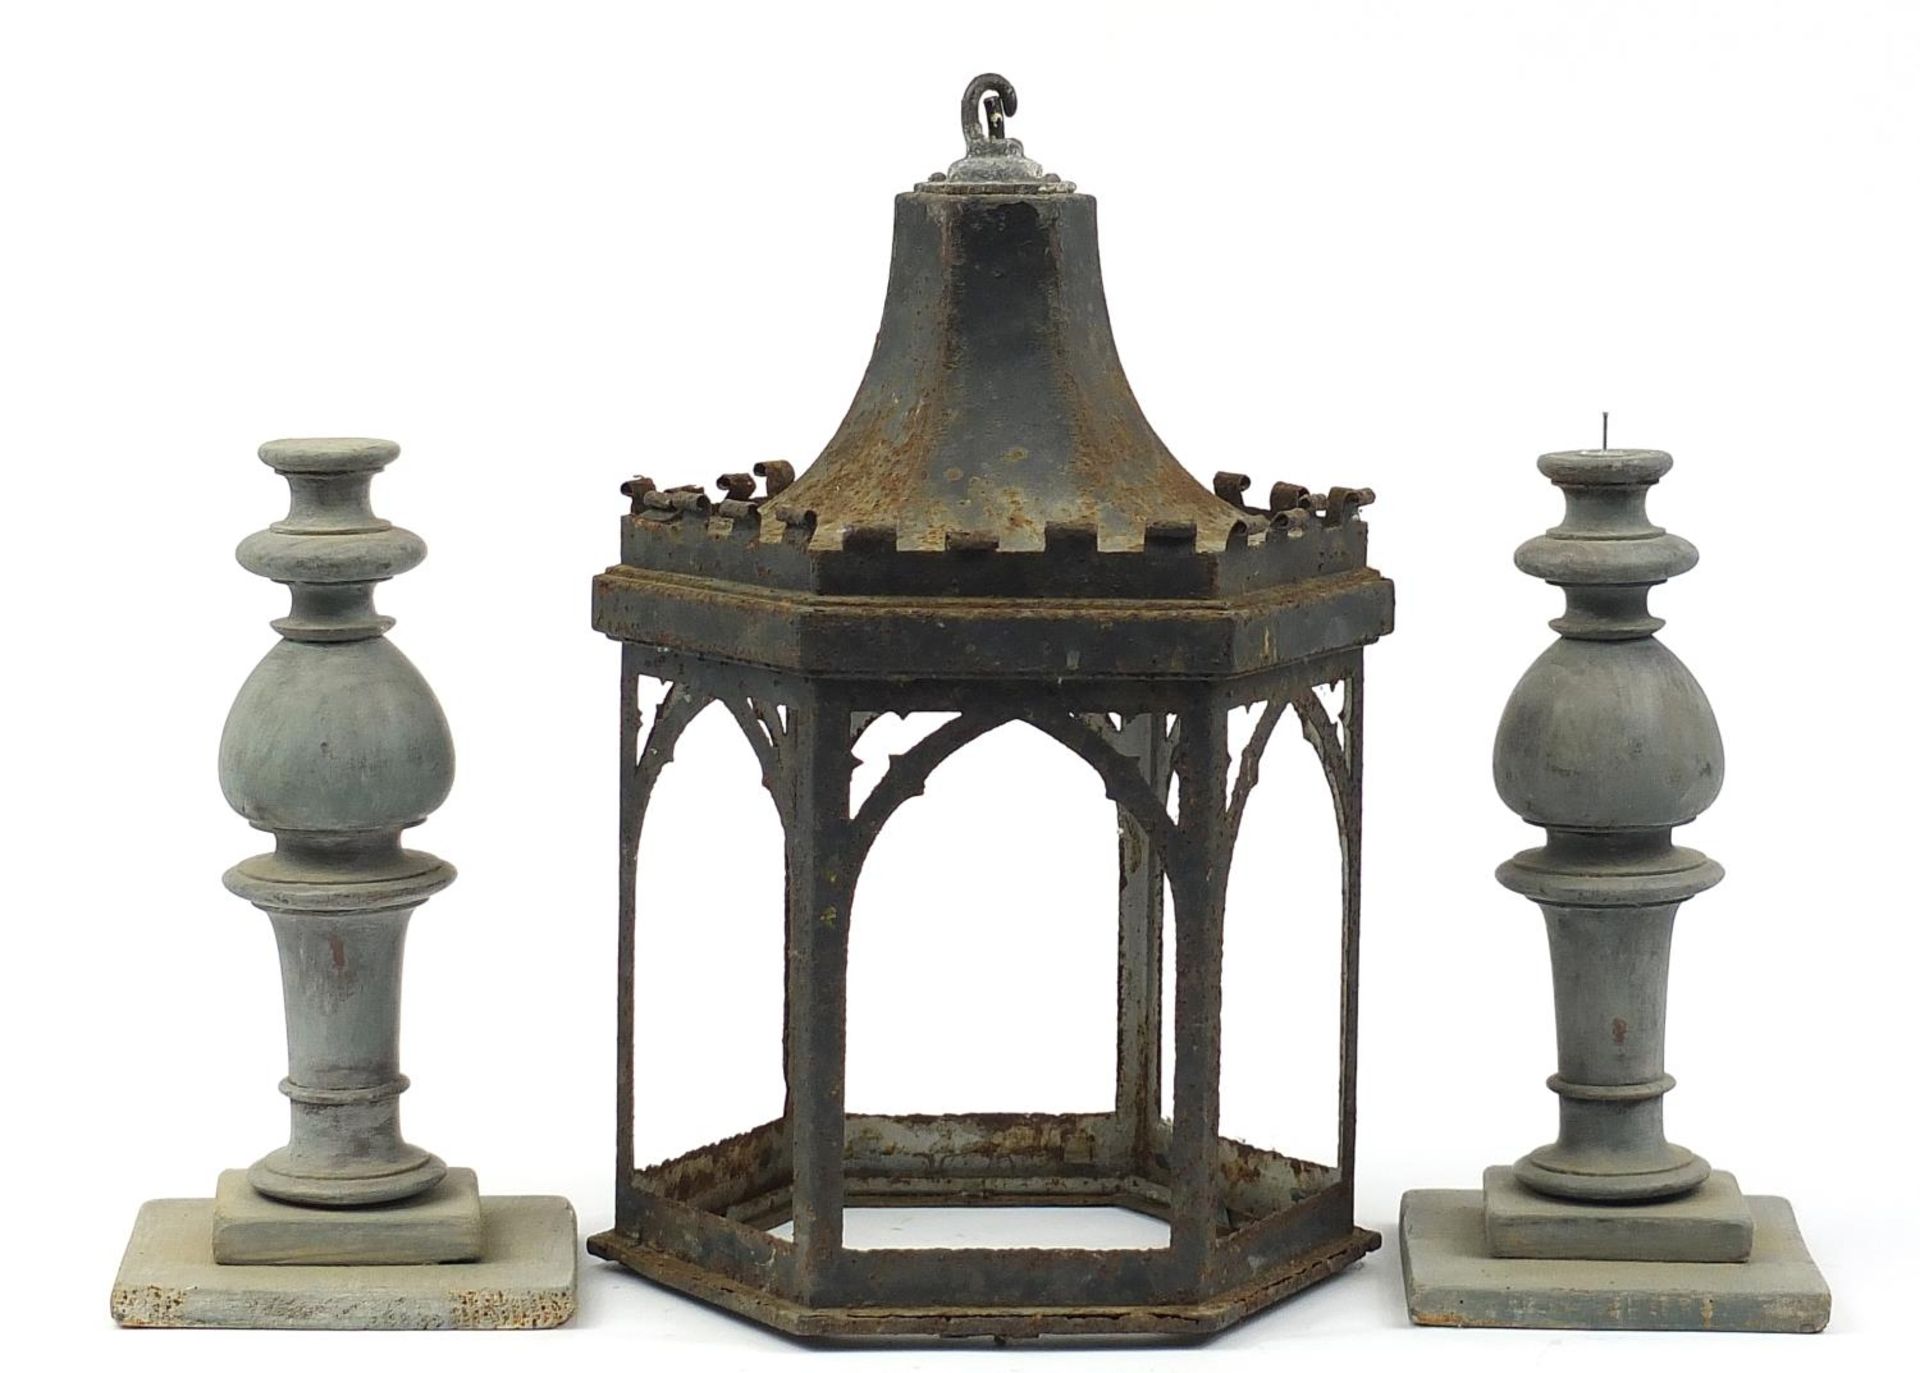 Vintage wrought iron lantern and a pair of turned wood candle stands, the lantern 49cm high